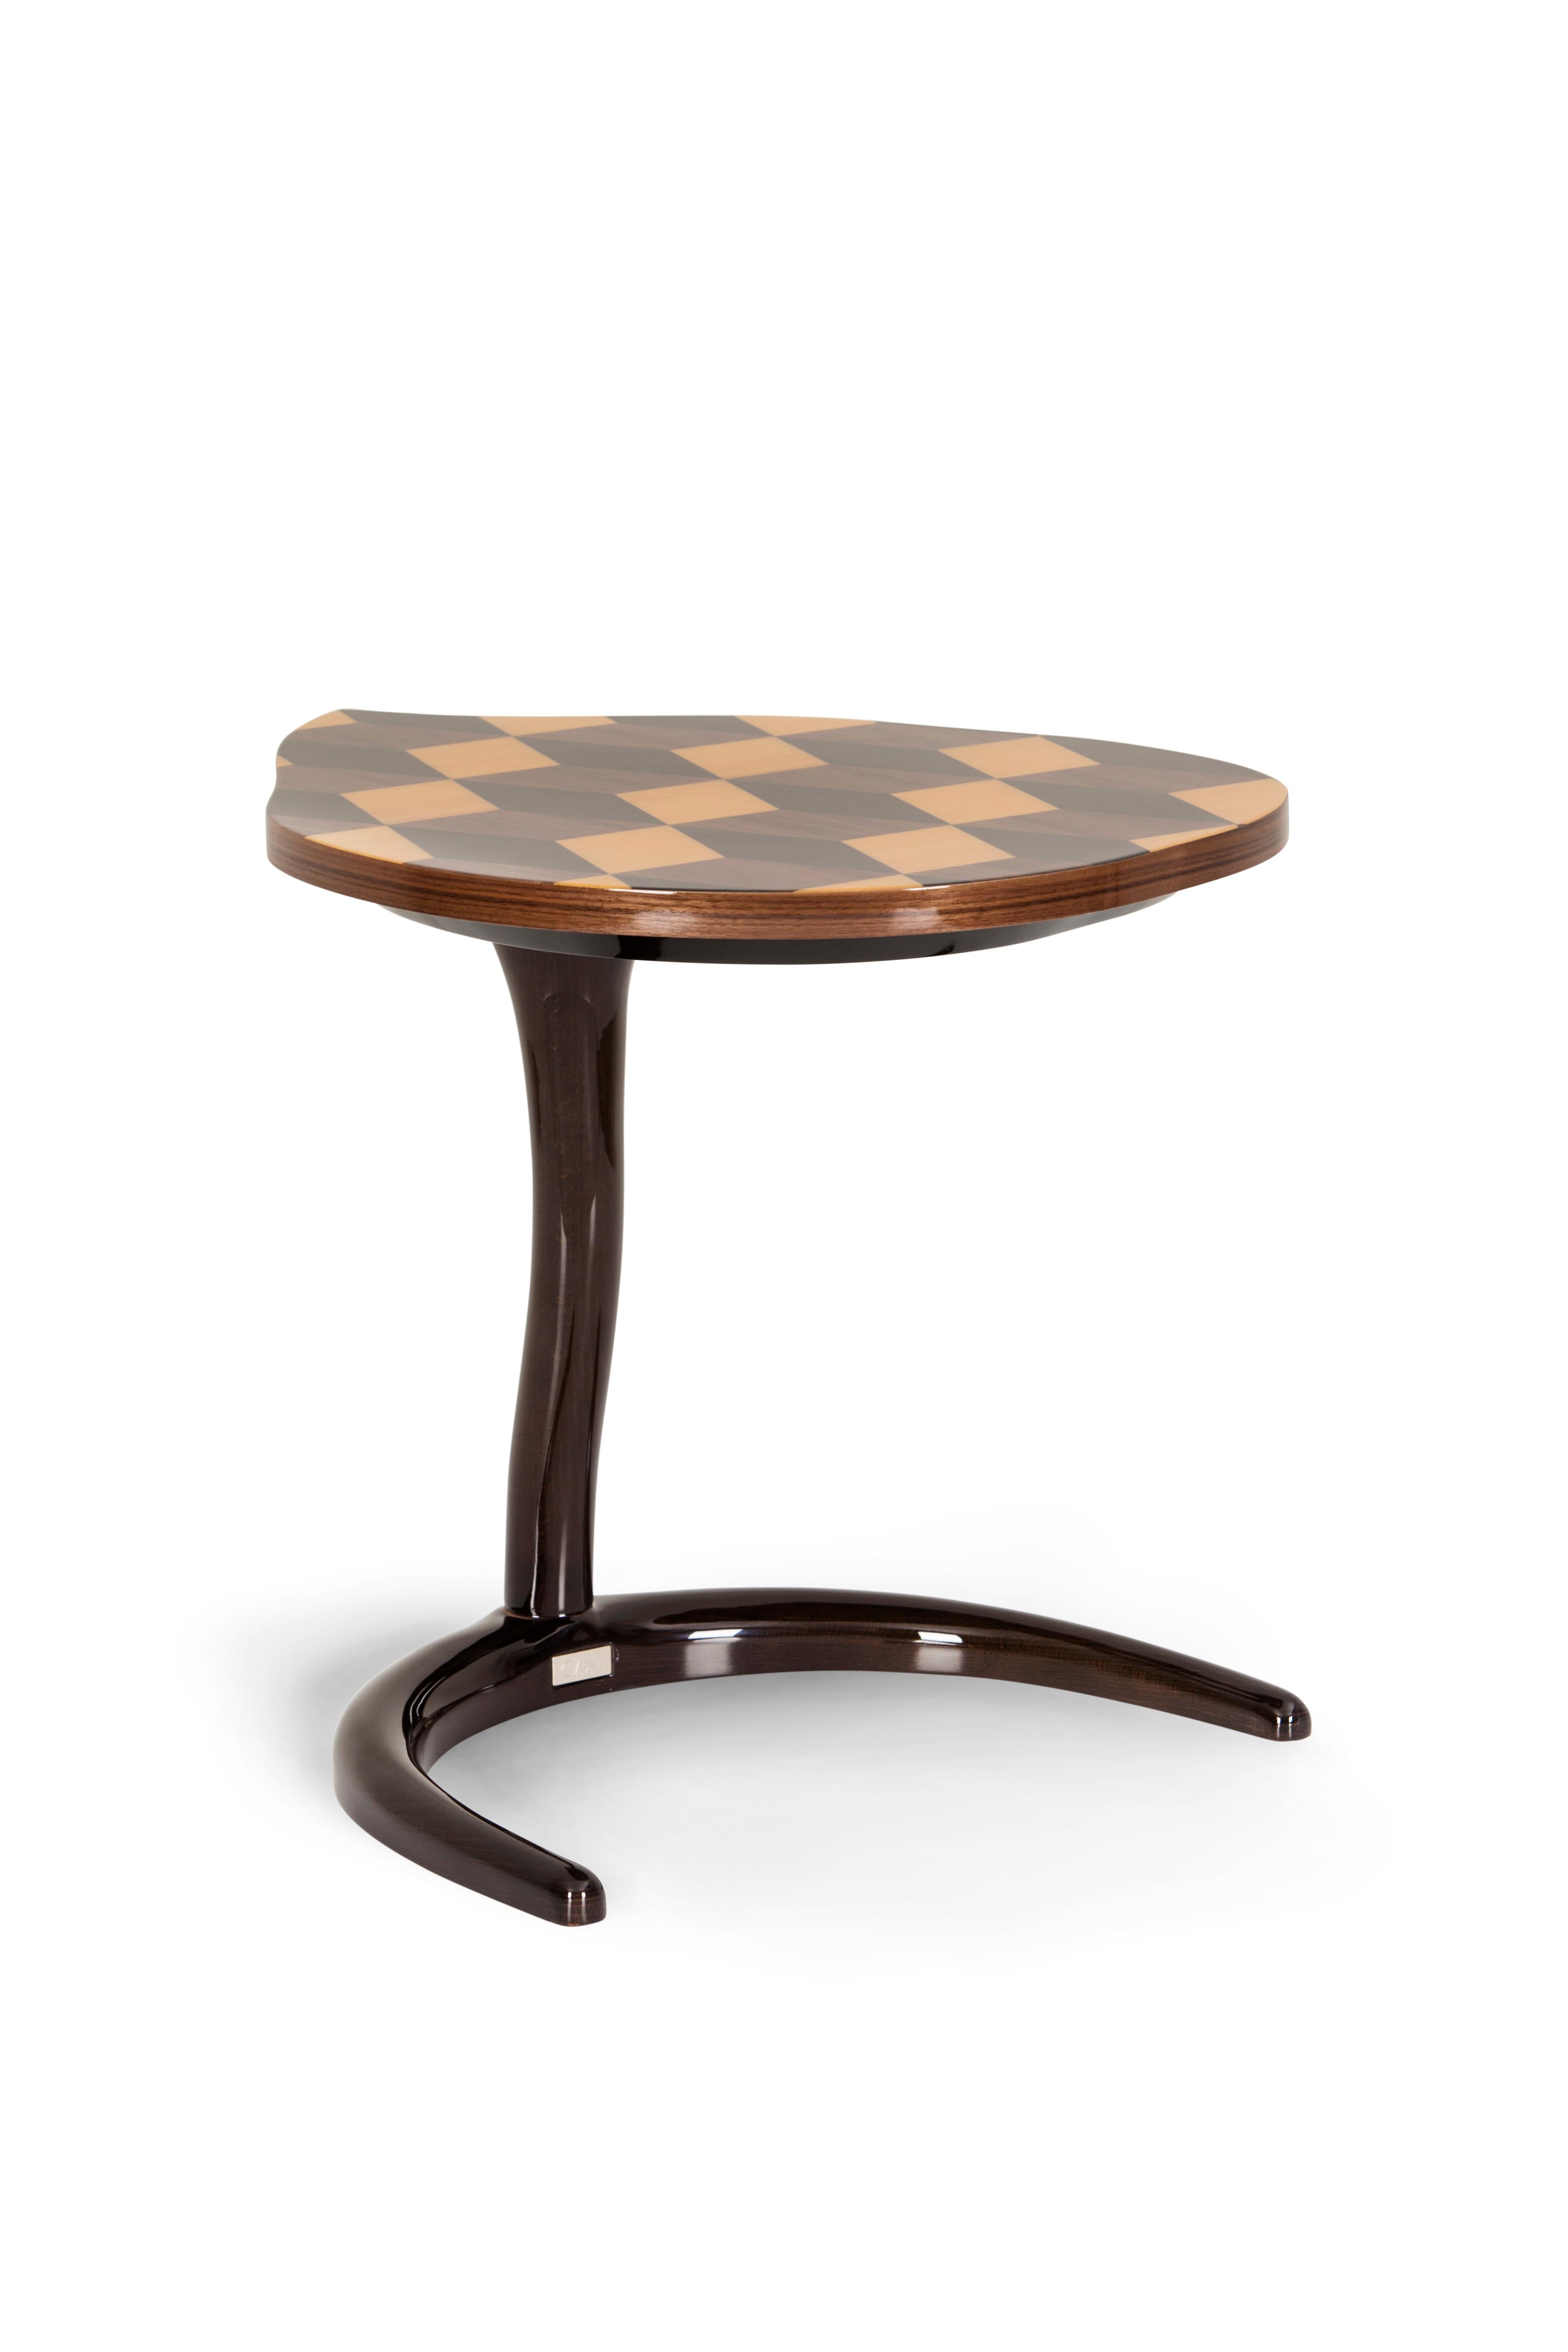 Portuguese Art Deco Marquetry Infinity Side Table Beech Handmade in Portugal by Greenapple For Sale